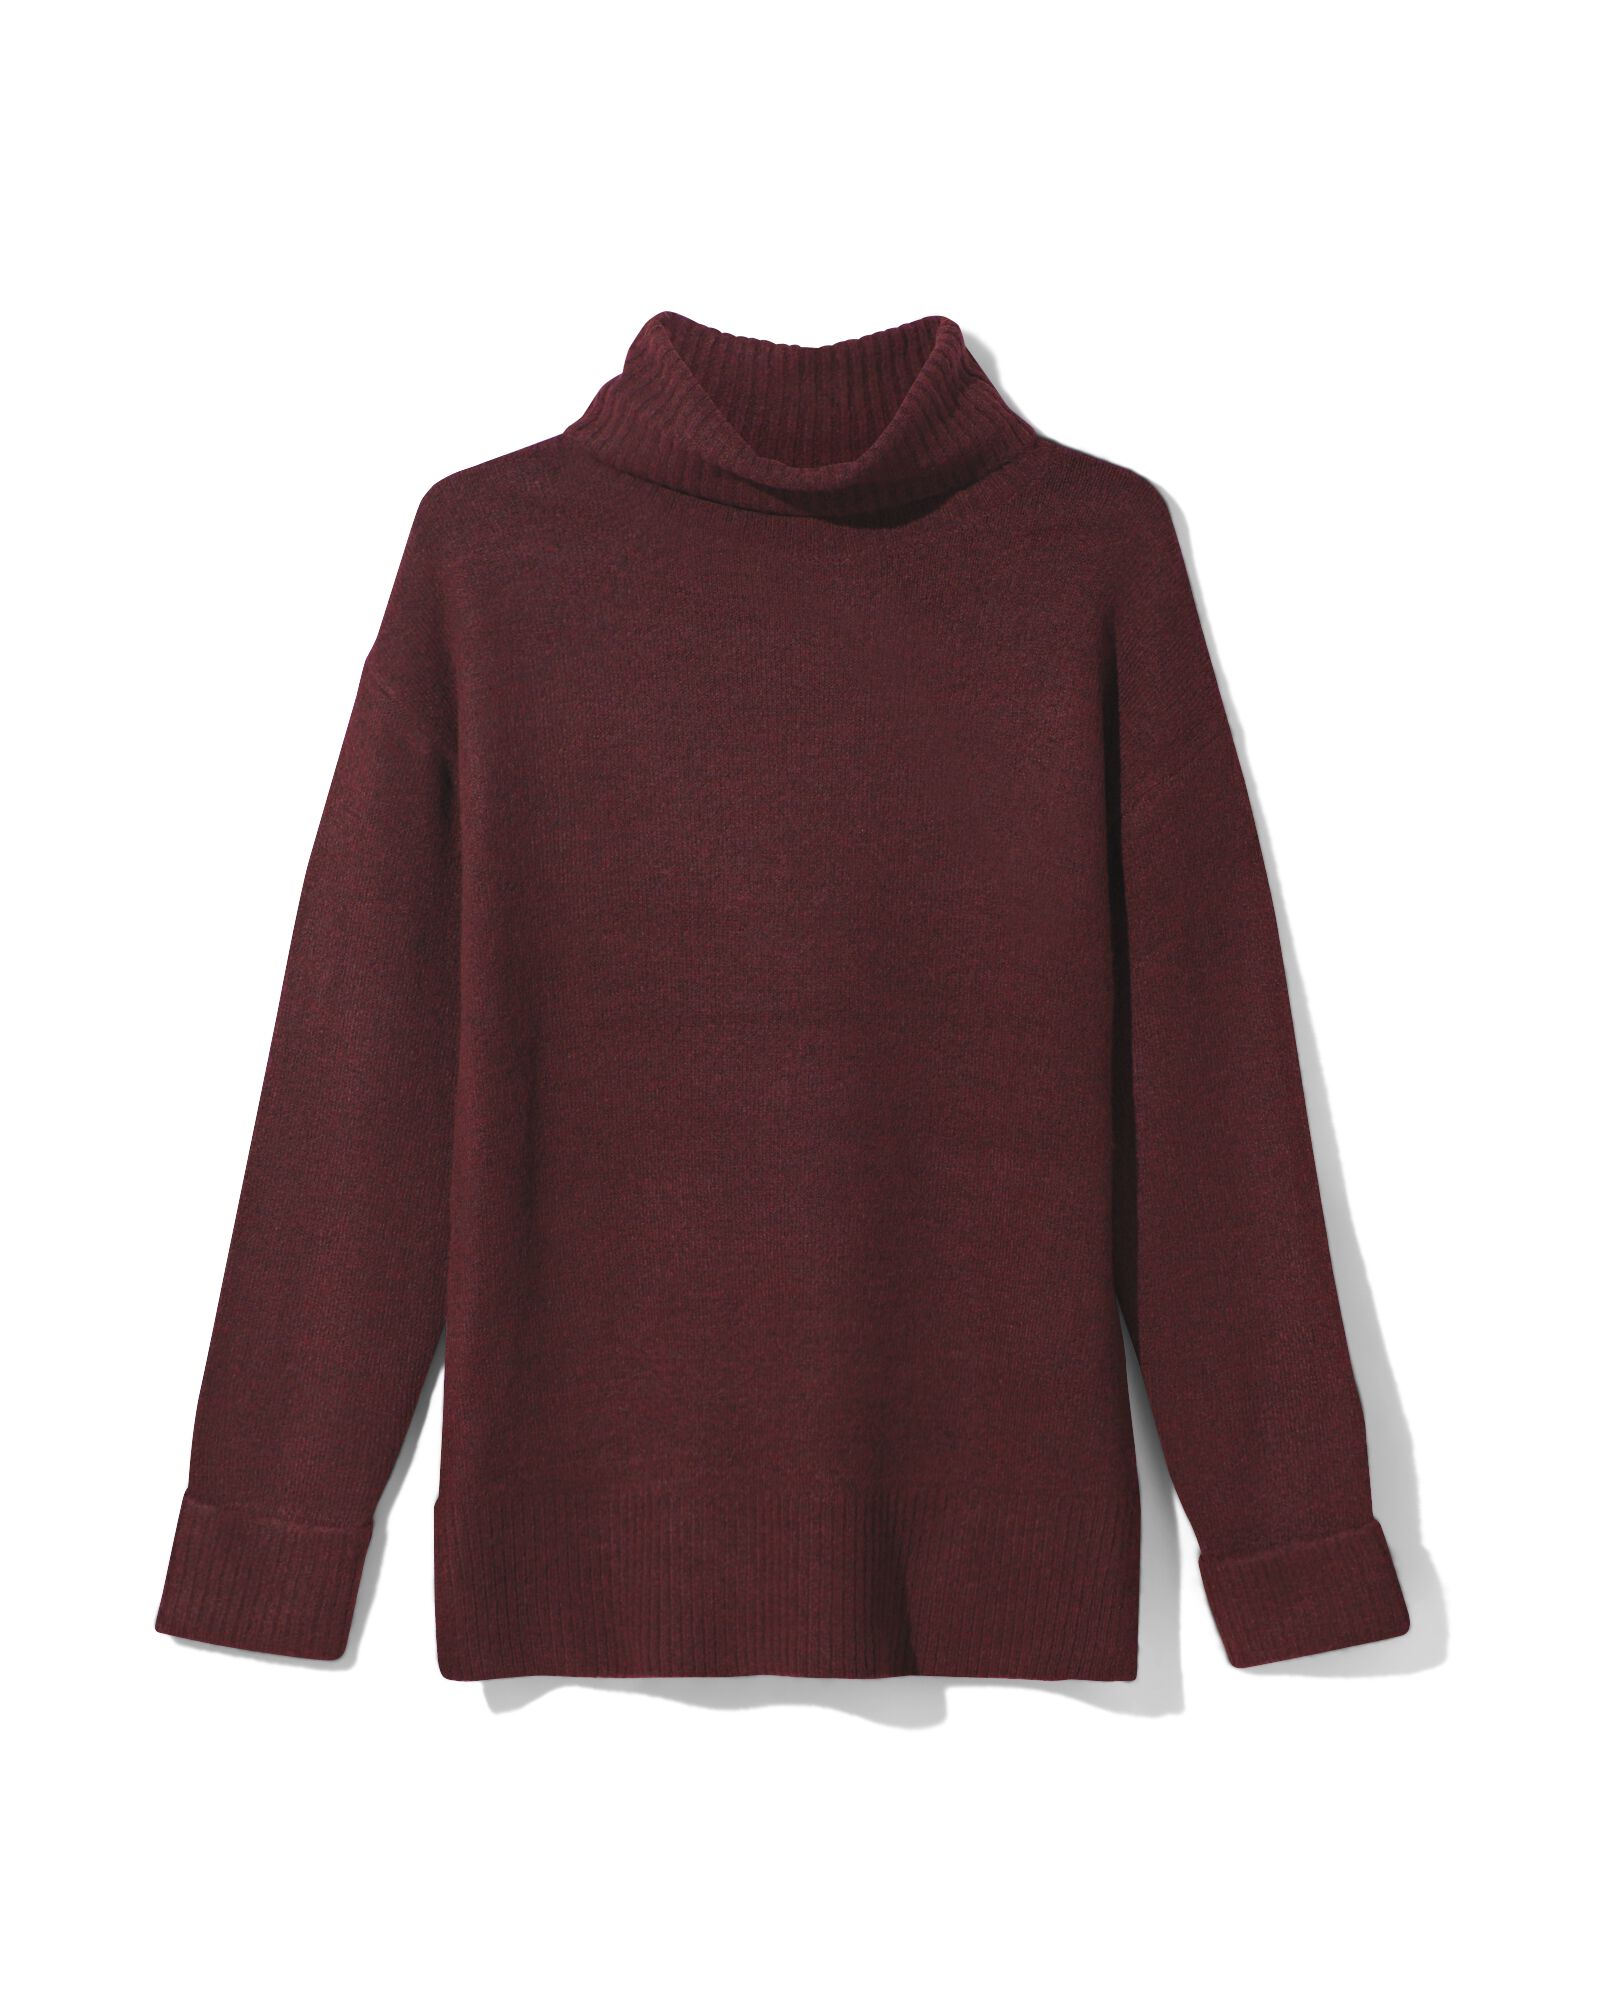 pull en maille avec col femme Vicky rouge rouge - 36326970RED - HEMA